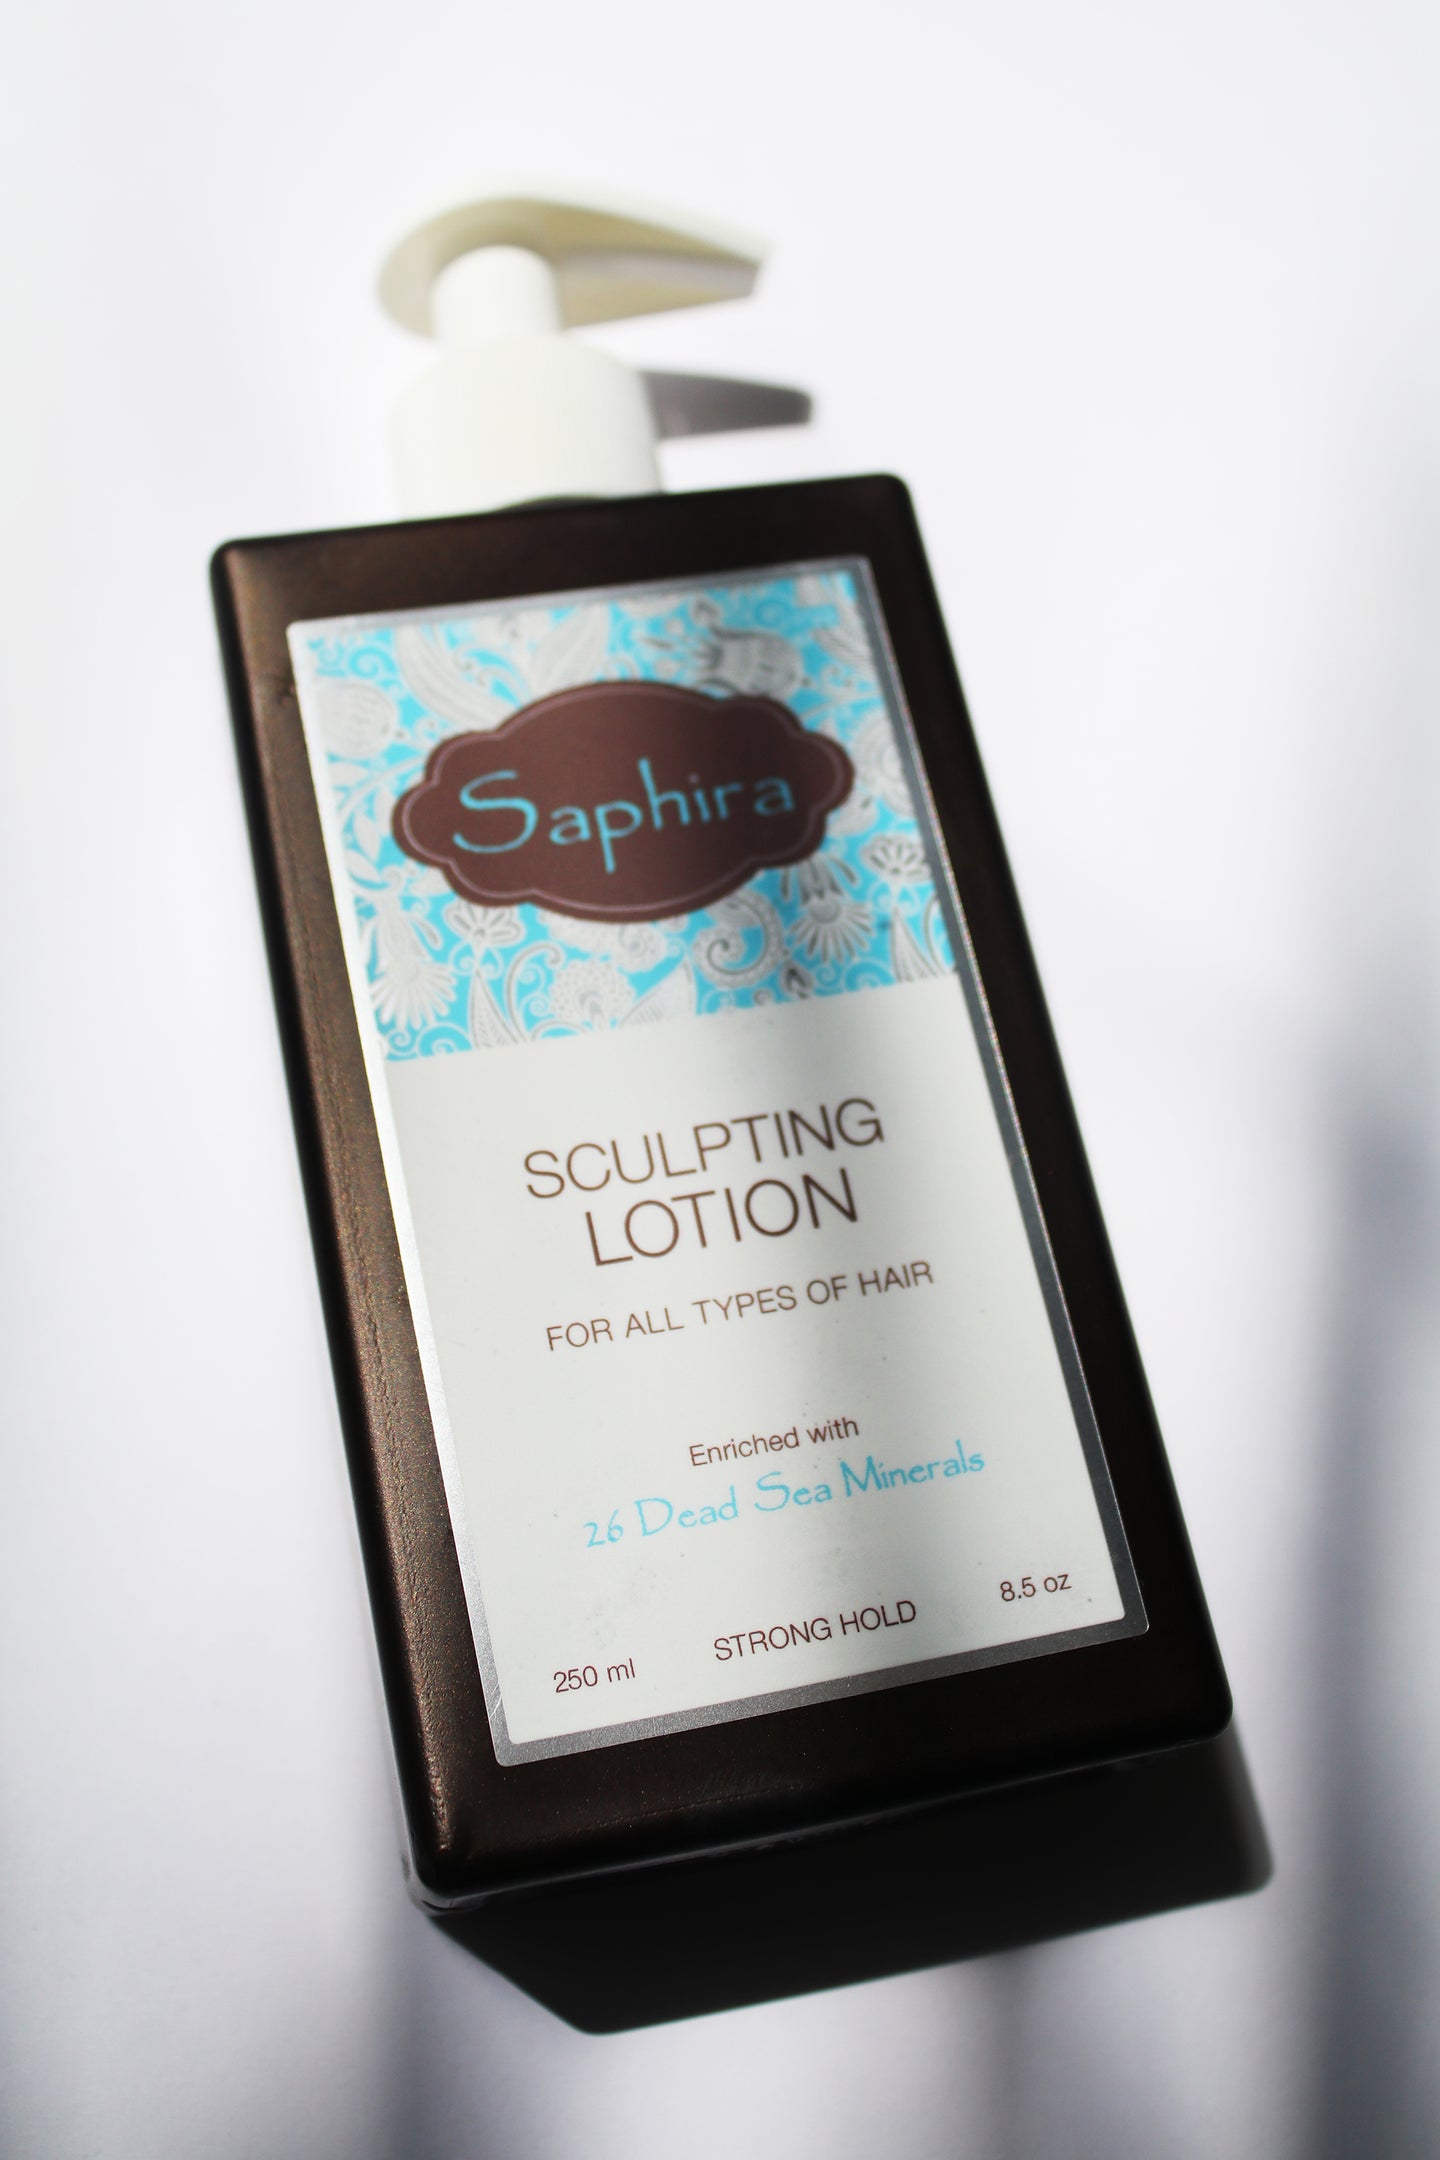 a bottle of sculpting lotion by Saphira. the bottle has a pump top.